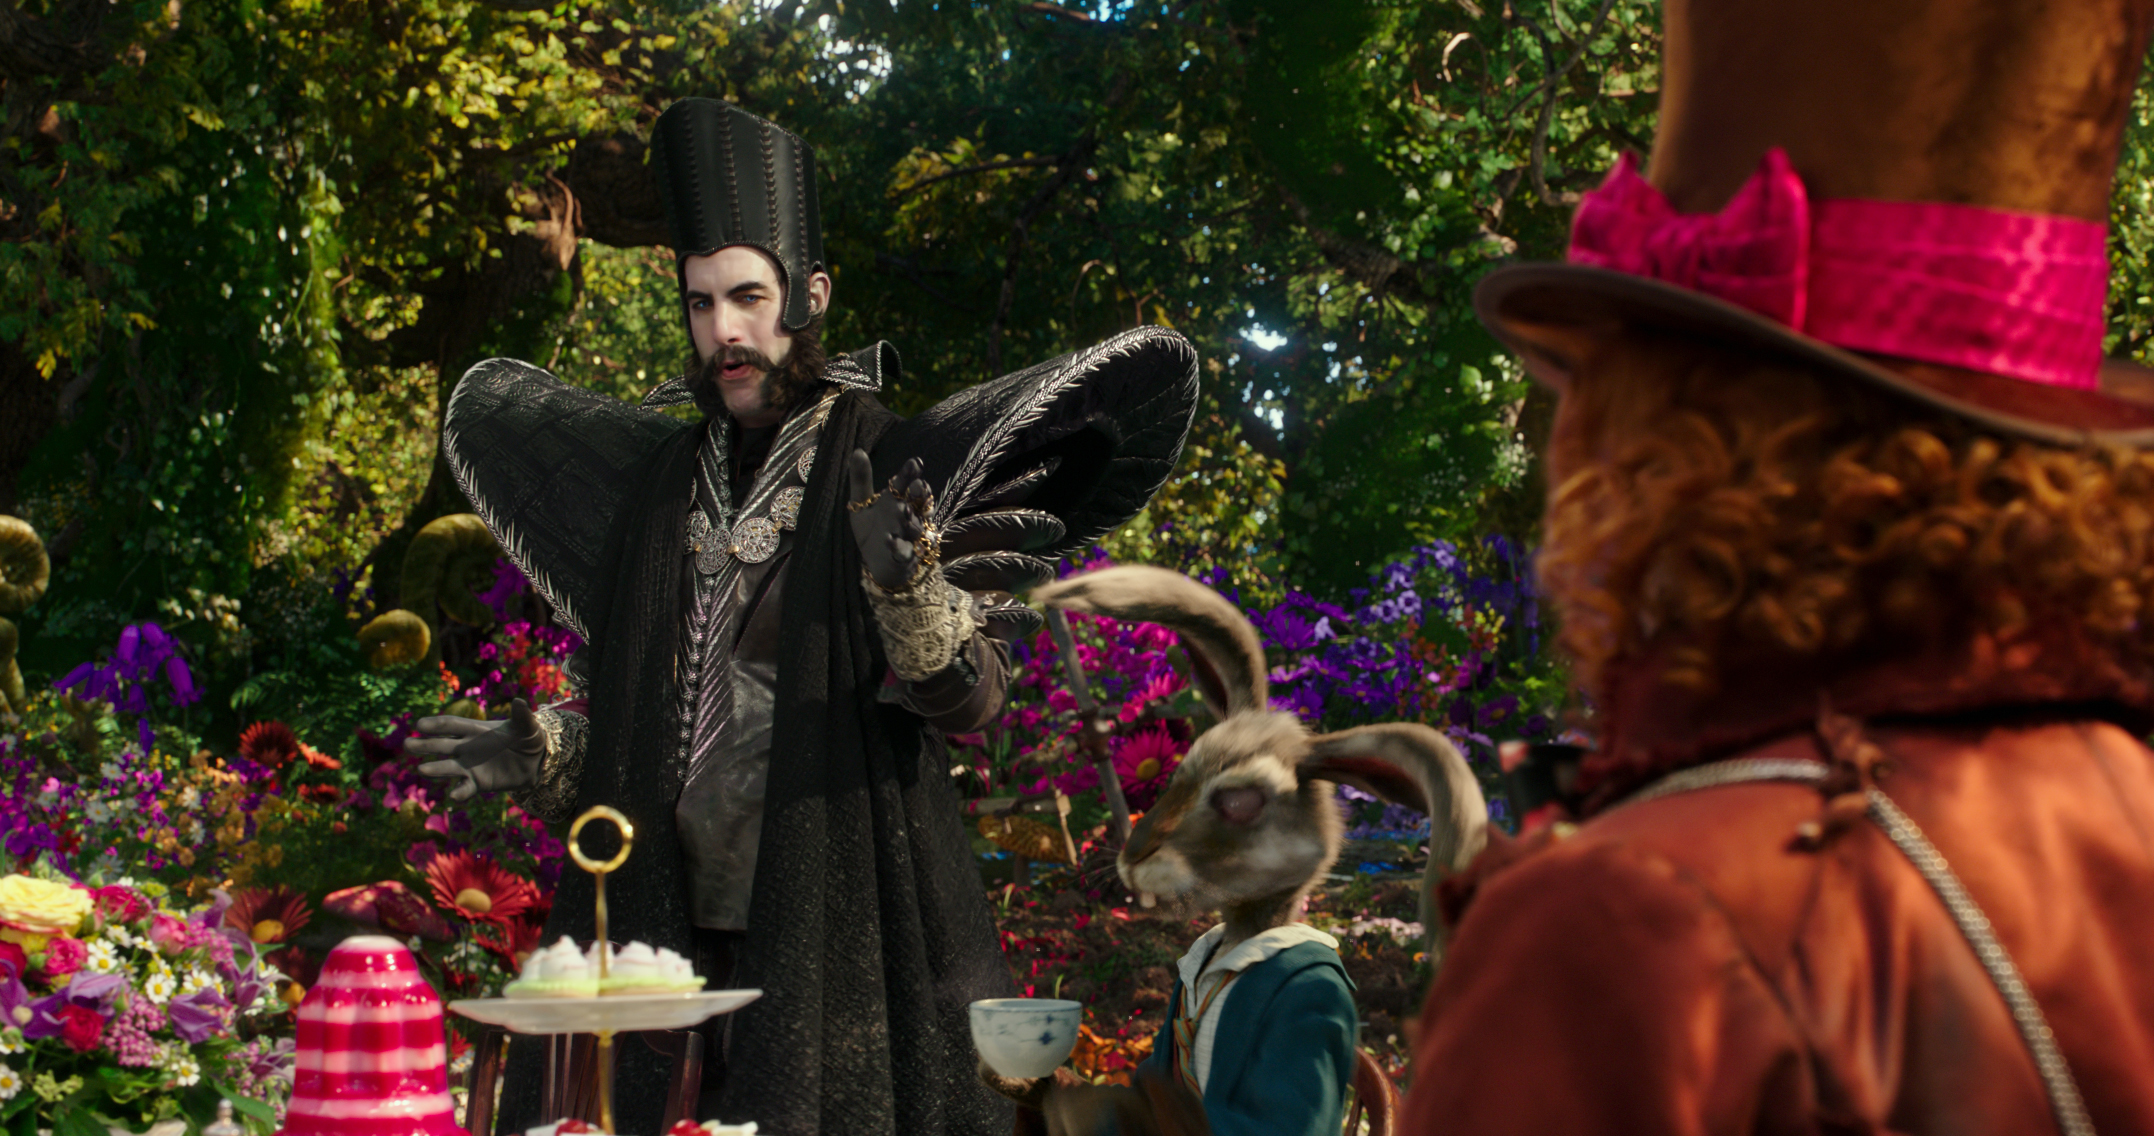 Sacha Baron Cohen is Time in Disney's ALICE THROUGH THE LOOKING GLASS, an all new adventure featuring the unforgettable characters from Lewis Carroll's beloved stories.